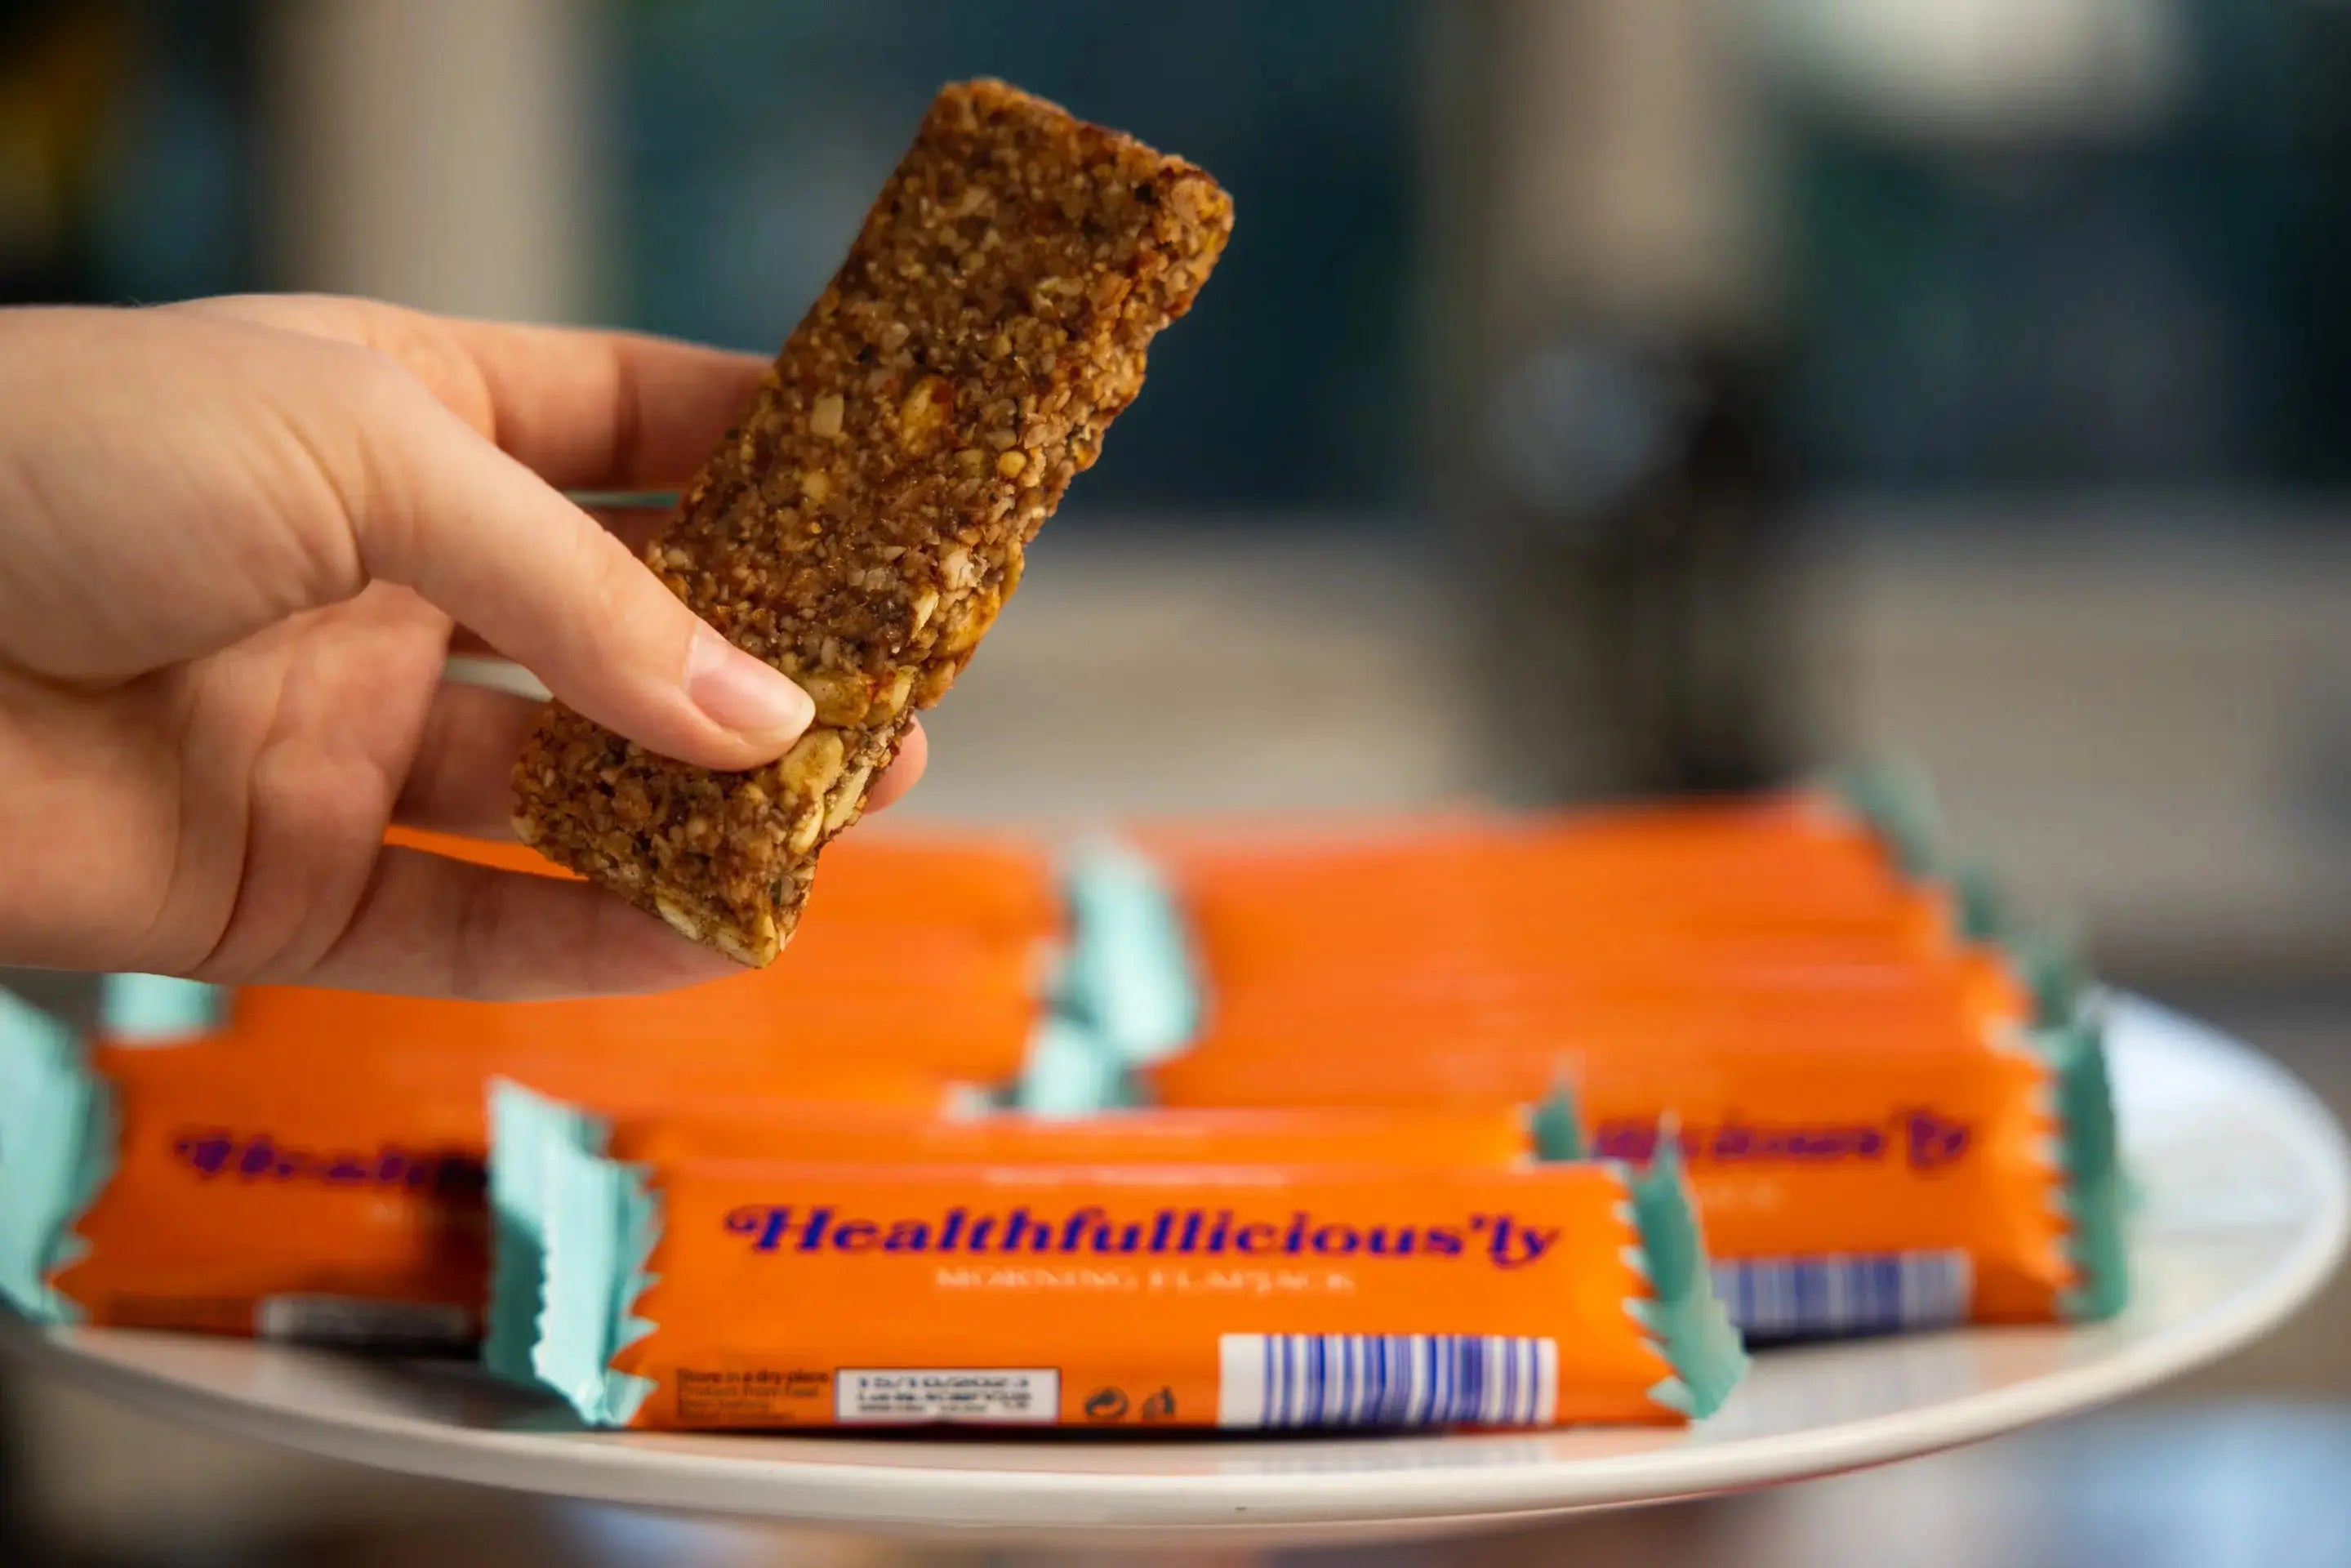 Healthfullicious'ly Morning Flapjack healthy snack bars  Store by GOE